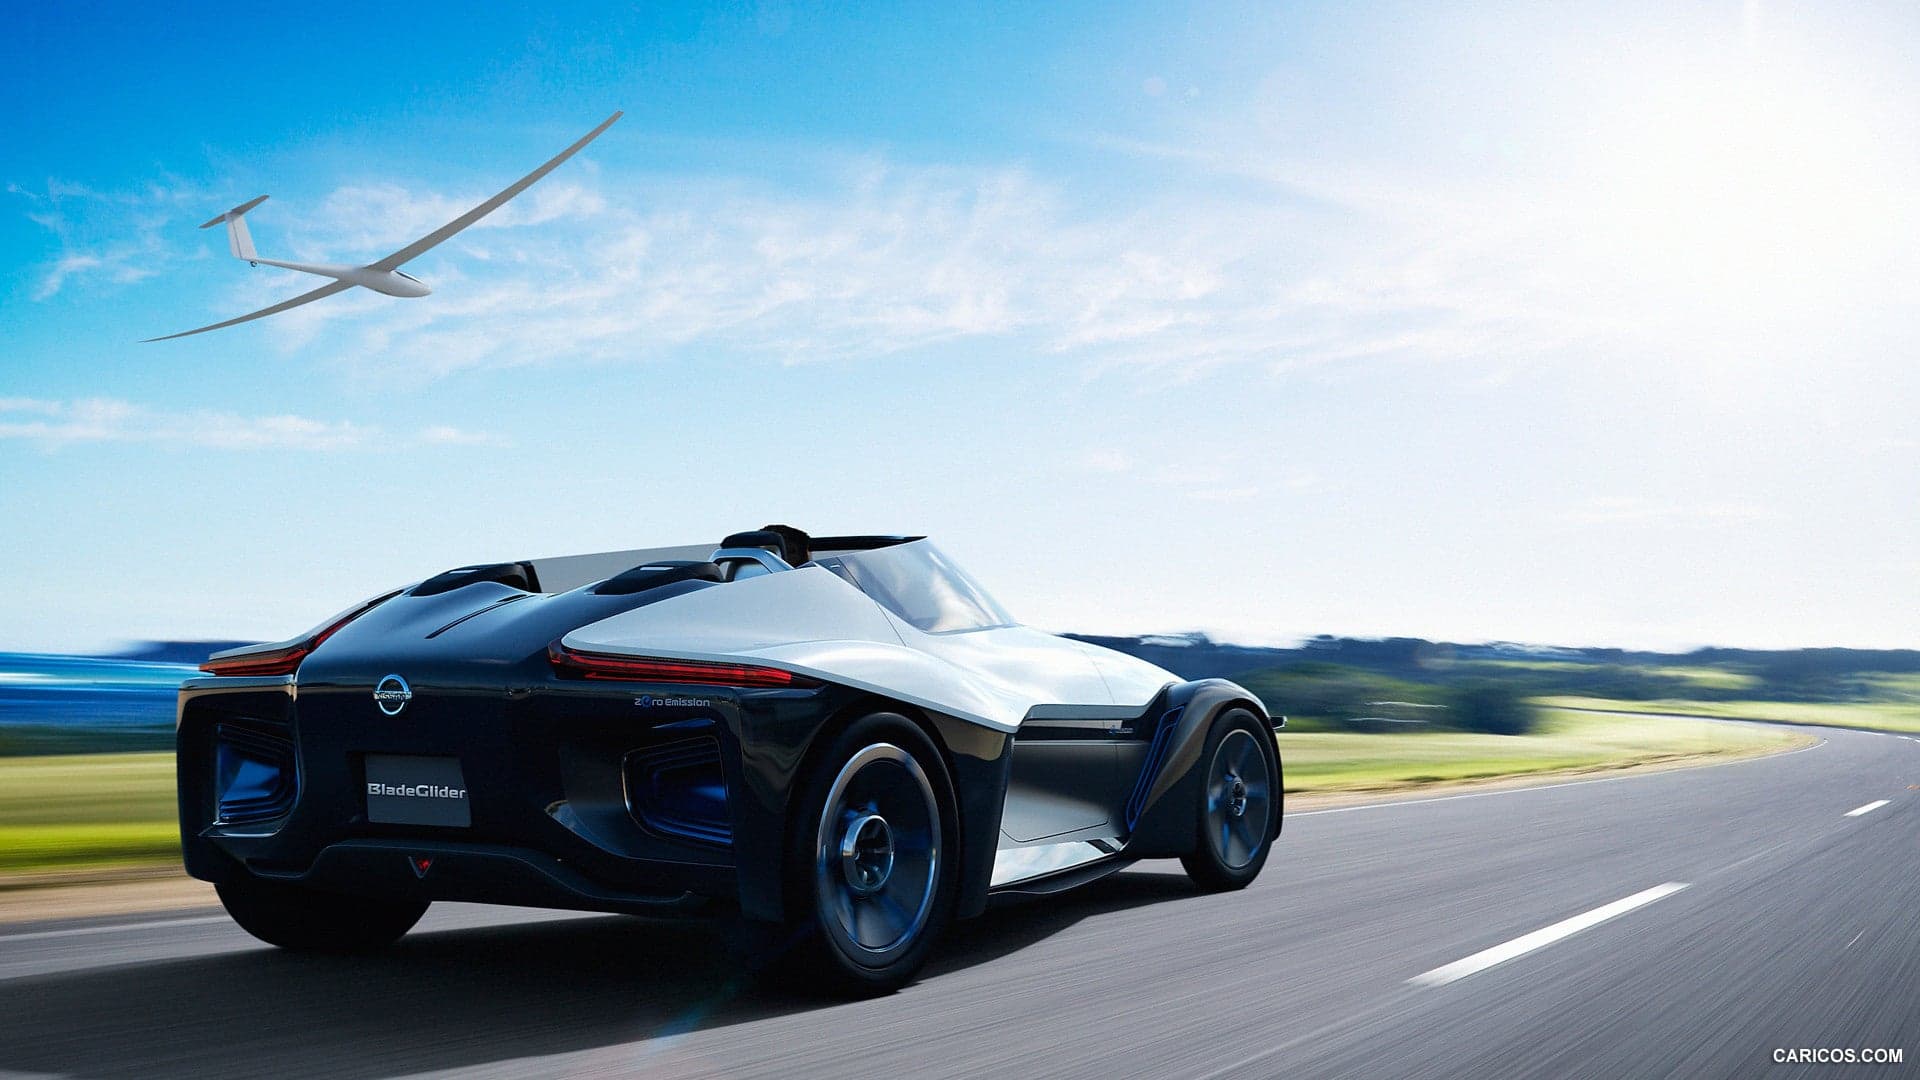 Nissan Brings its Electric ‘BladeGlider’ Sports Car to Goodwood